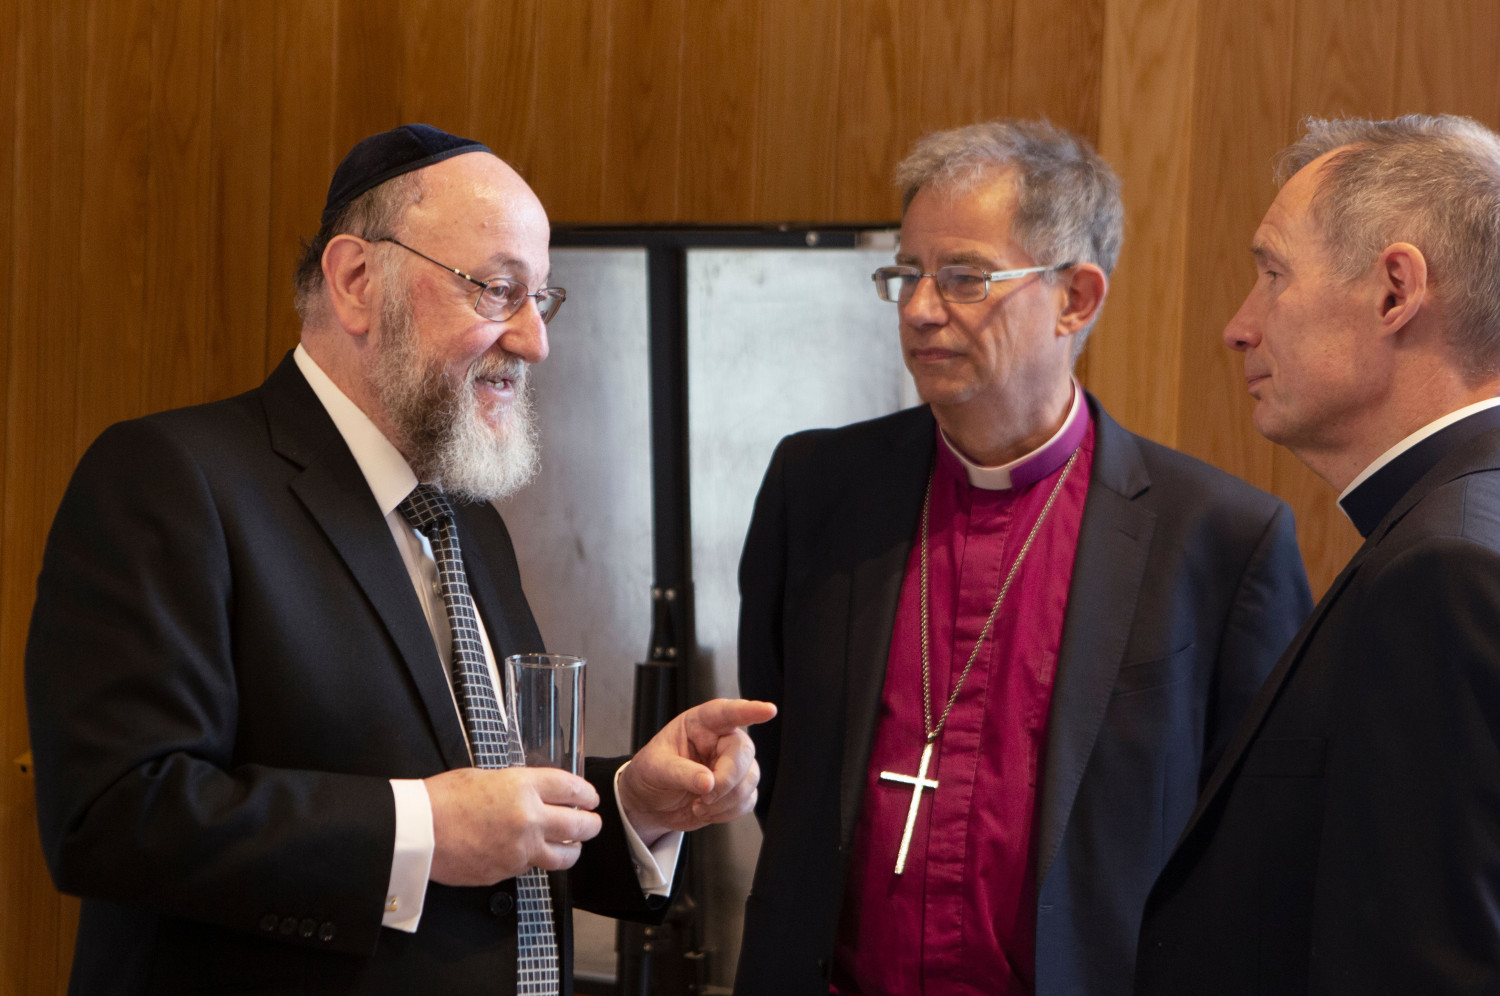 The Chief Rabbi, Bishop Steven and Archdeacon Jonathan chat over drinks